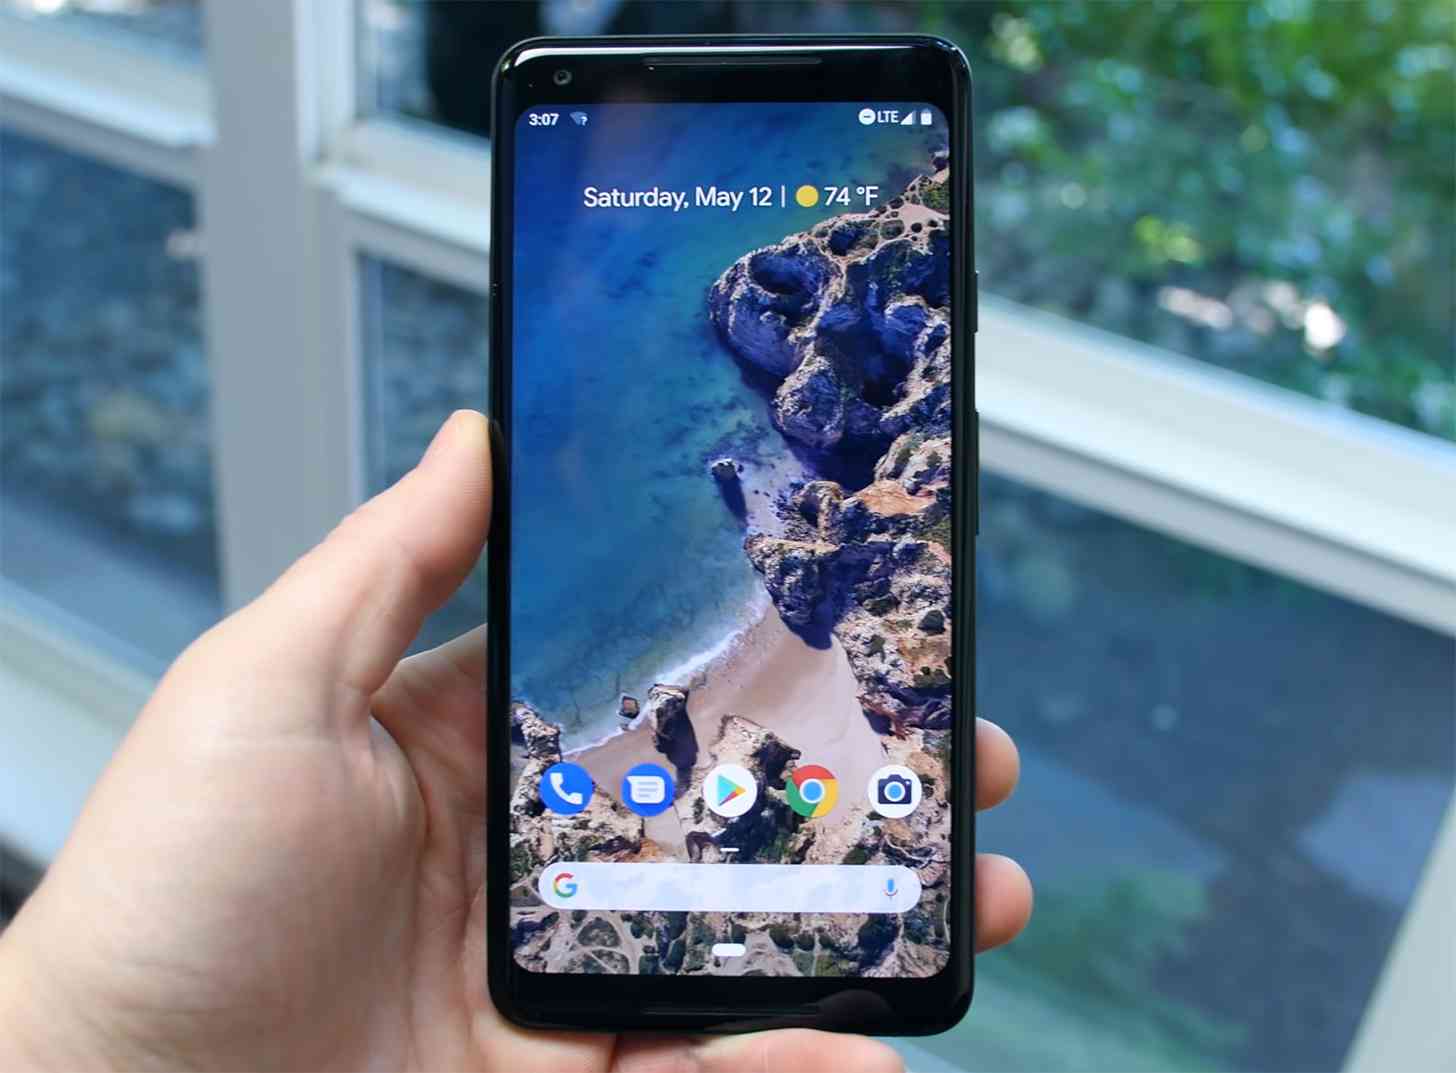 Android P Pixel 2 XL hands-on